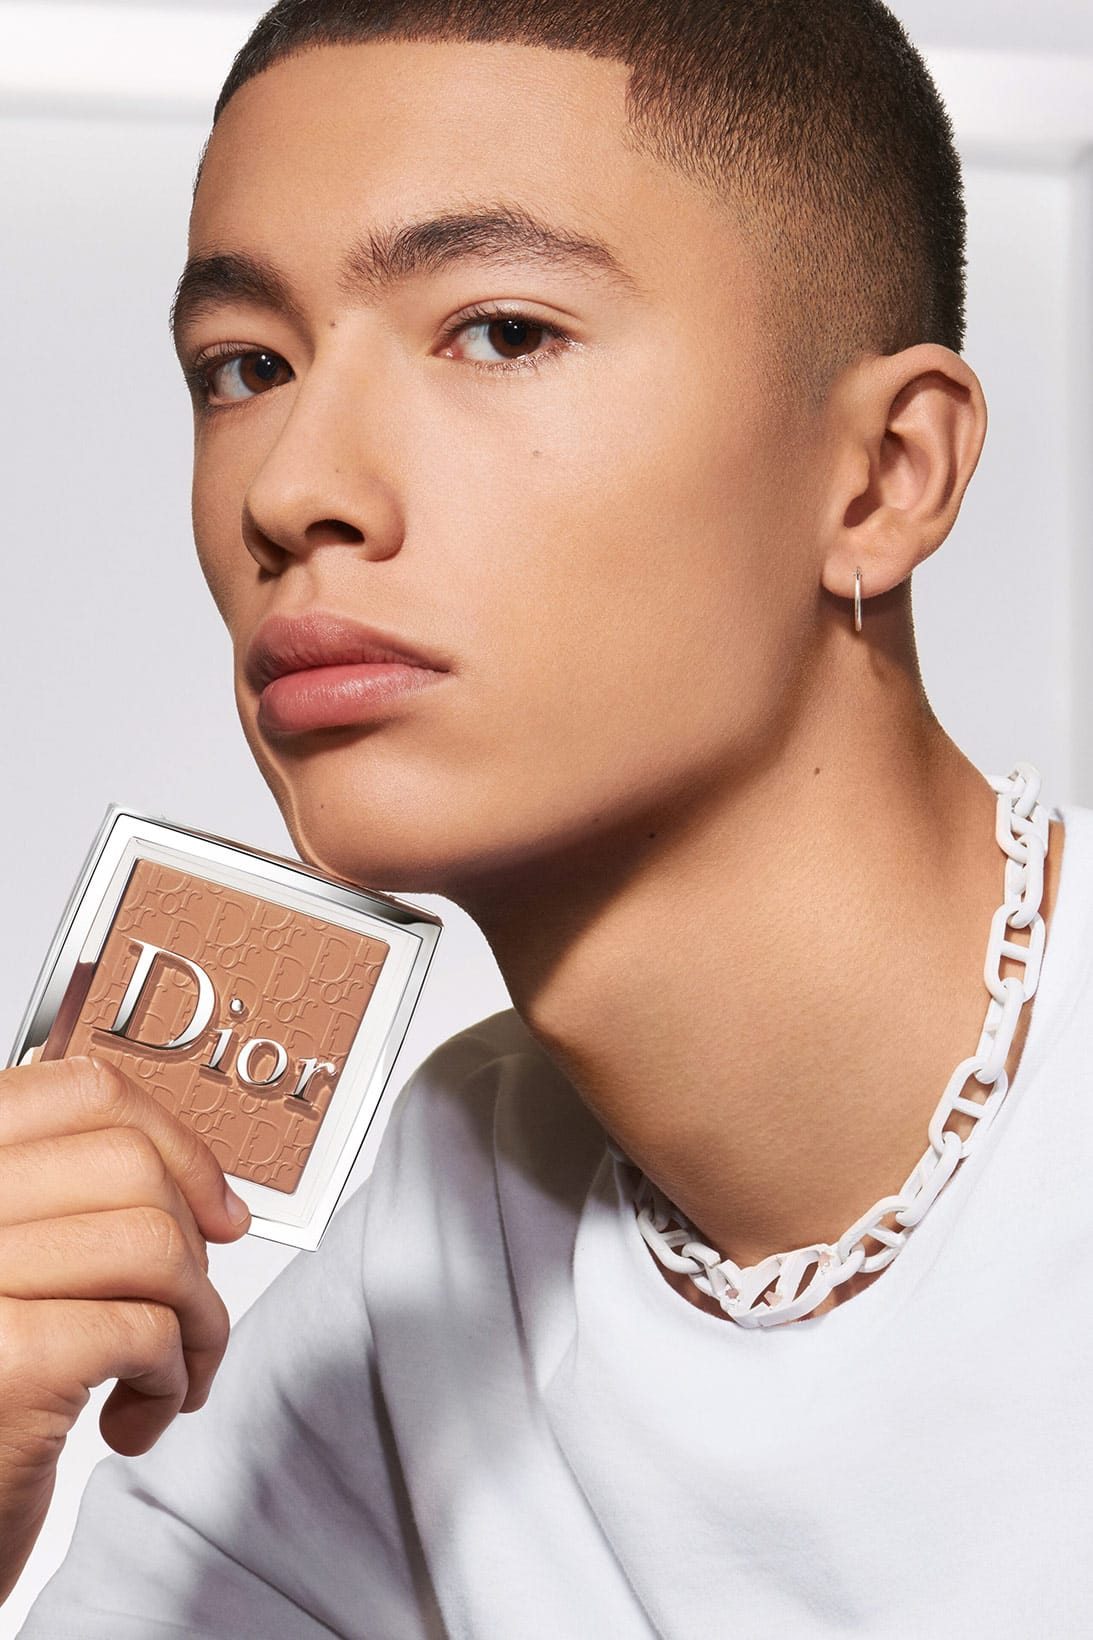 dior face and body foundation price